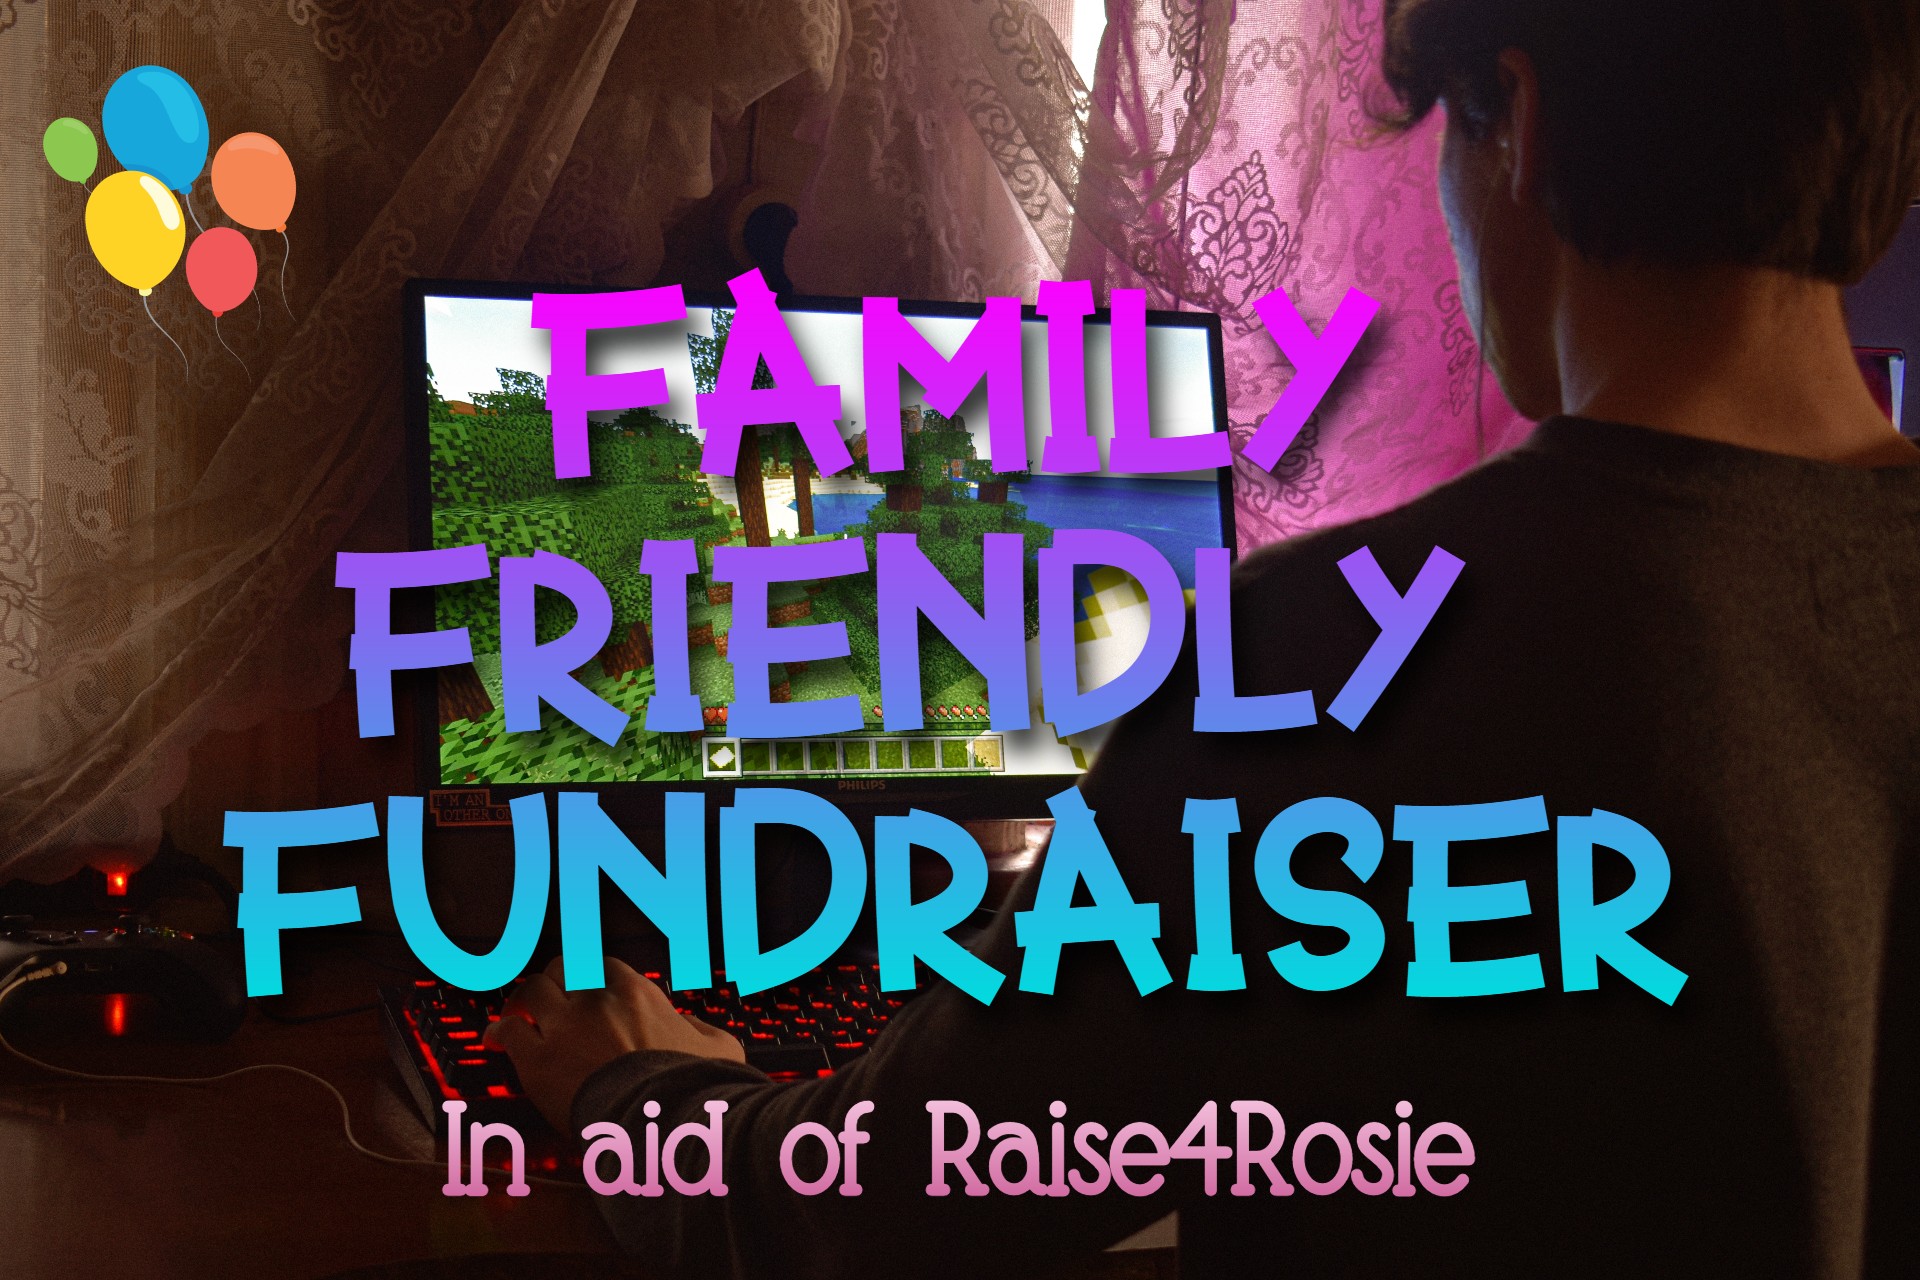 A title image reading "Family Friendly Fundraiser in aid of Raise For Rosie"